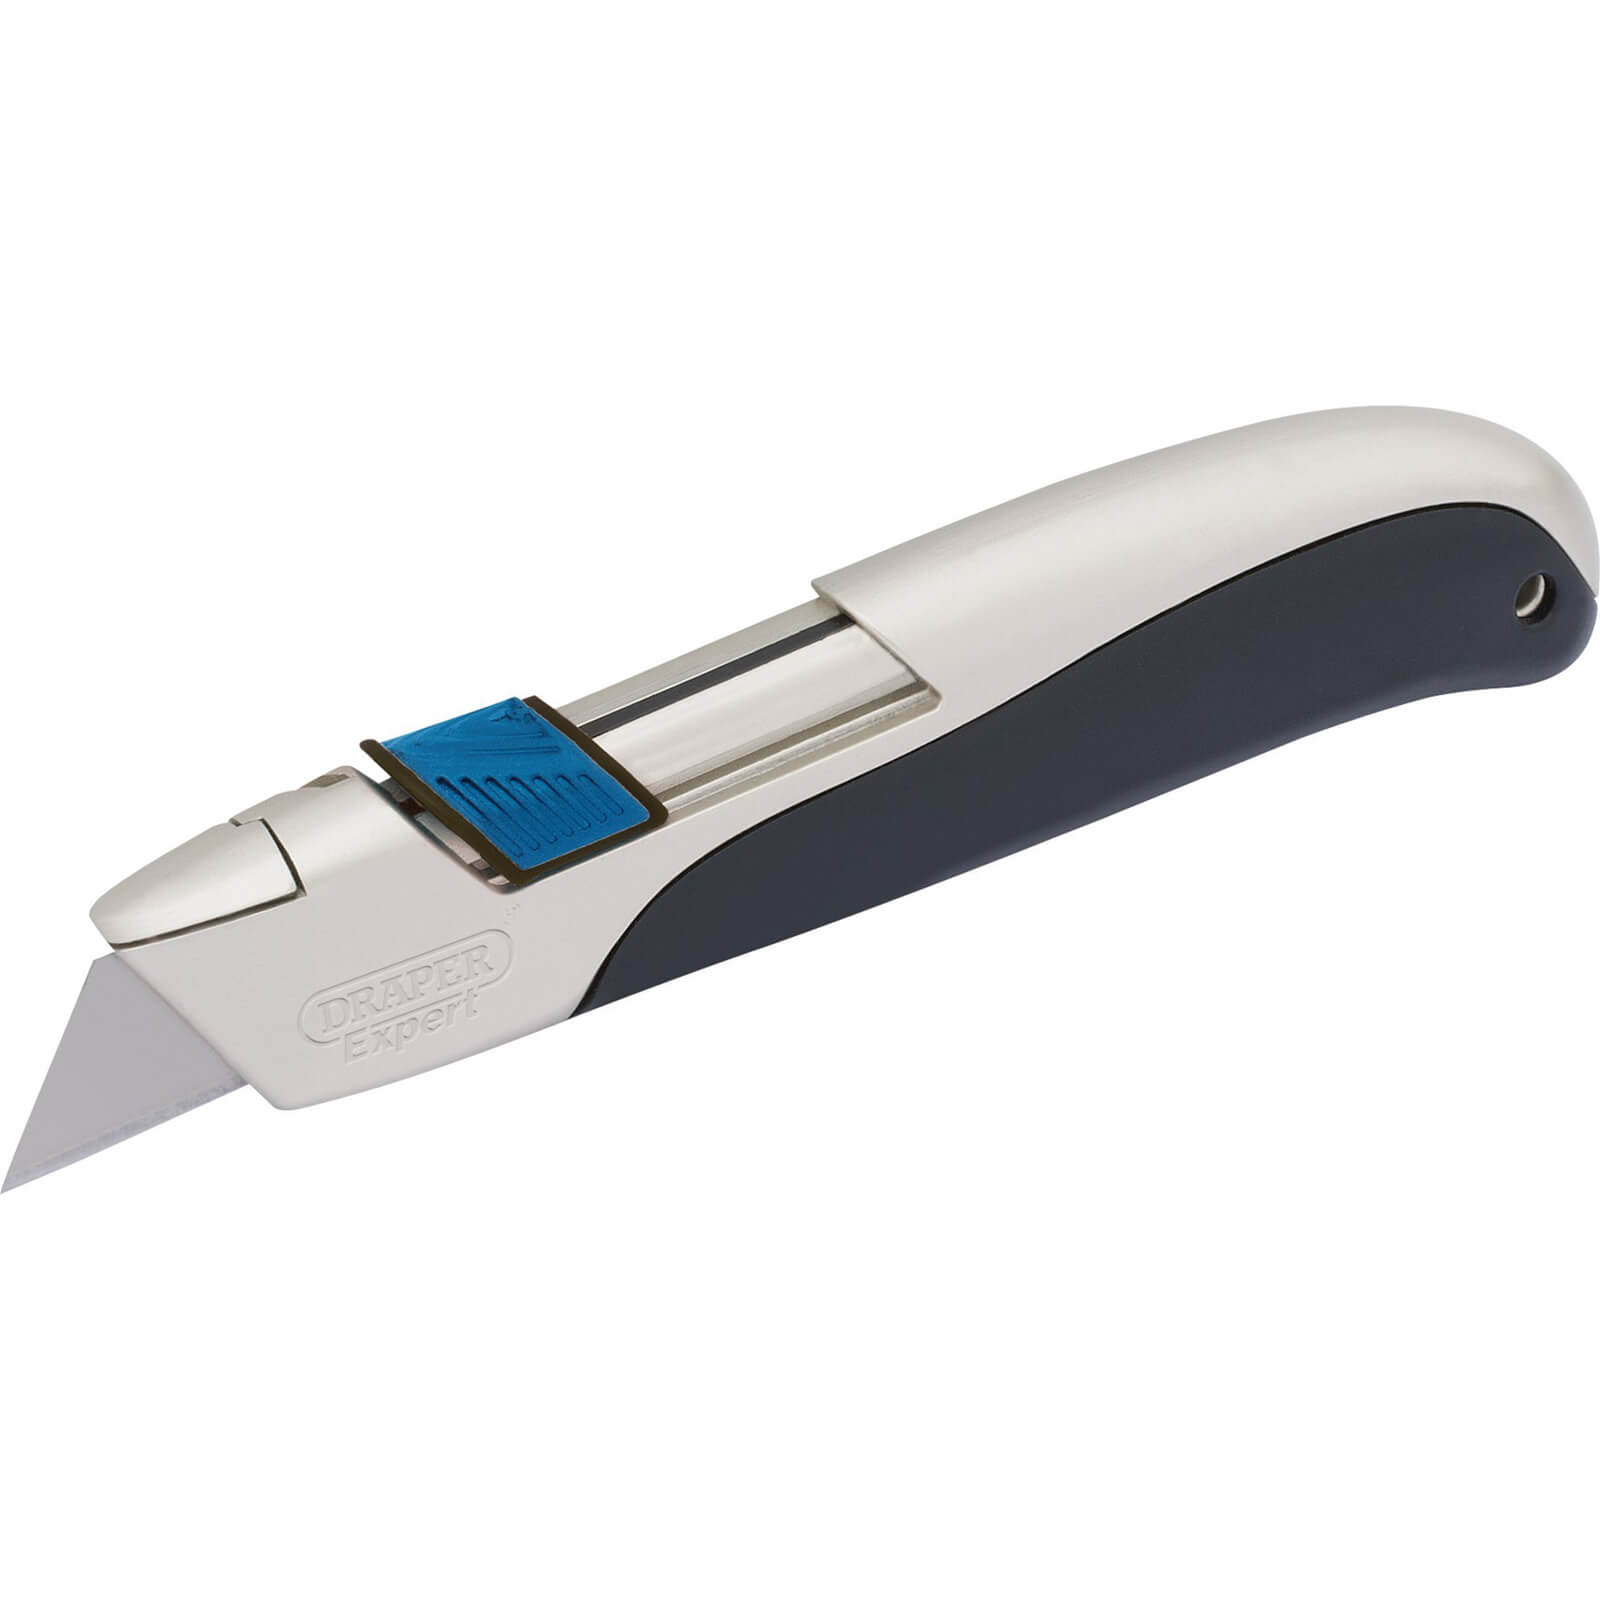 Draper Soft Grip Auto Blade Retract Safety Trimming Knife